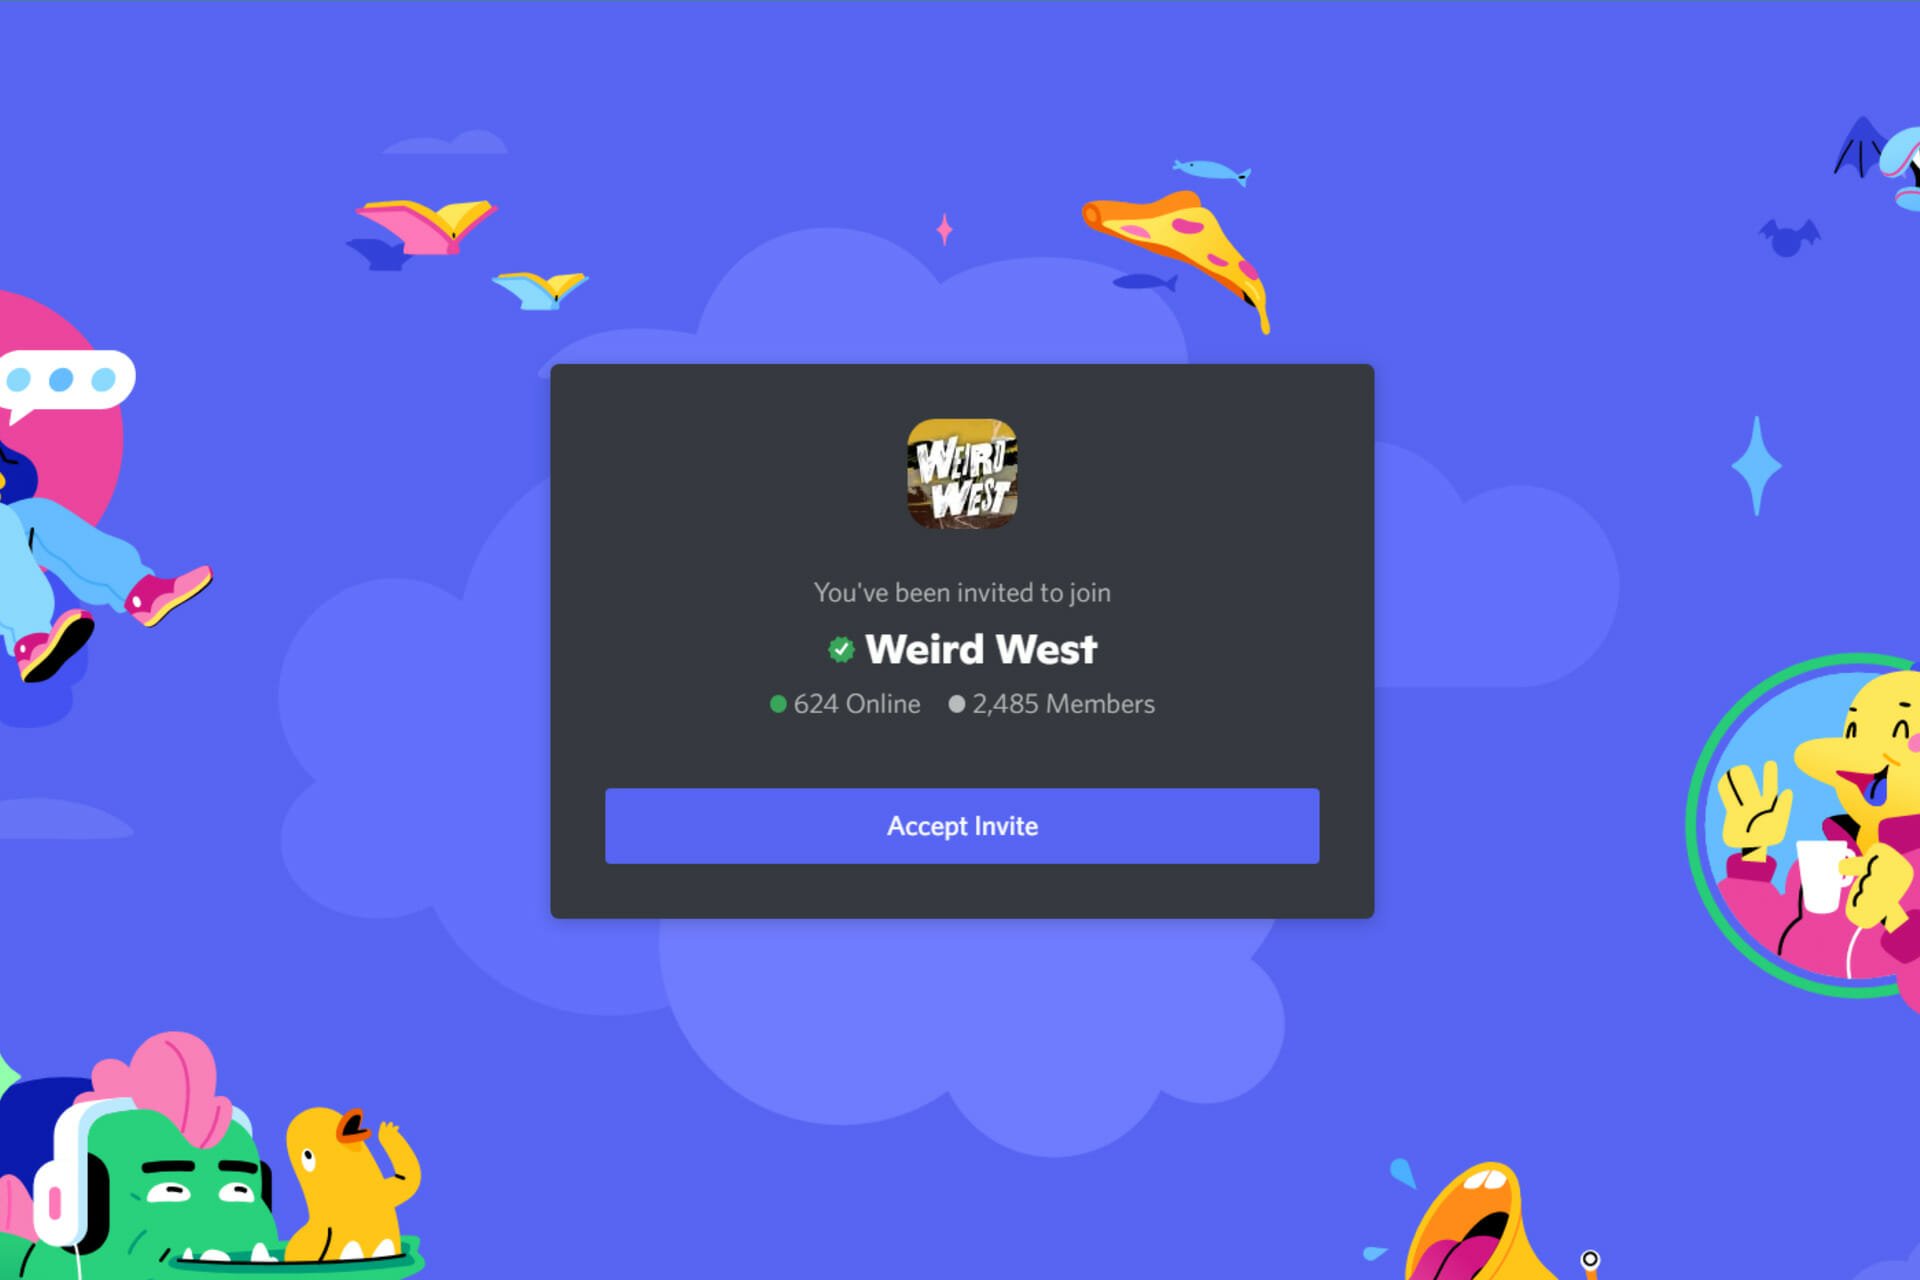 The Weird West Discord server is out: Check how to use it